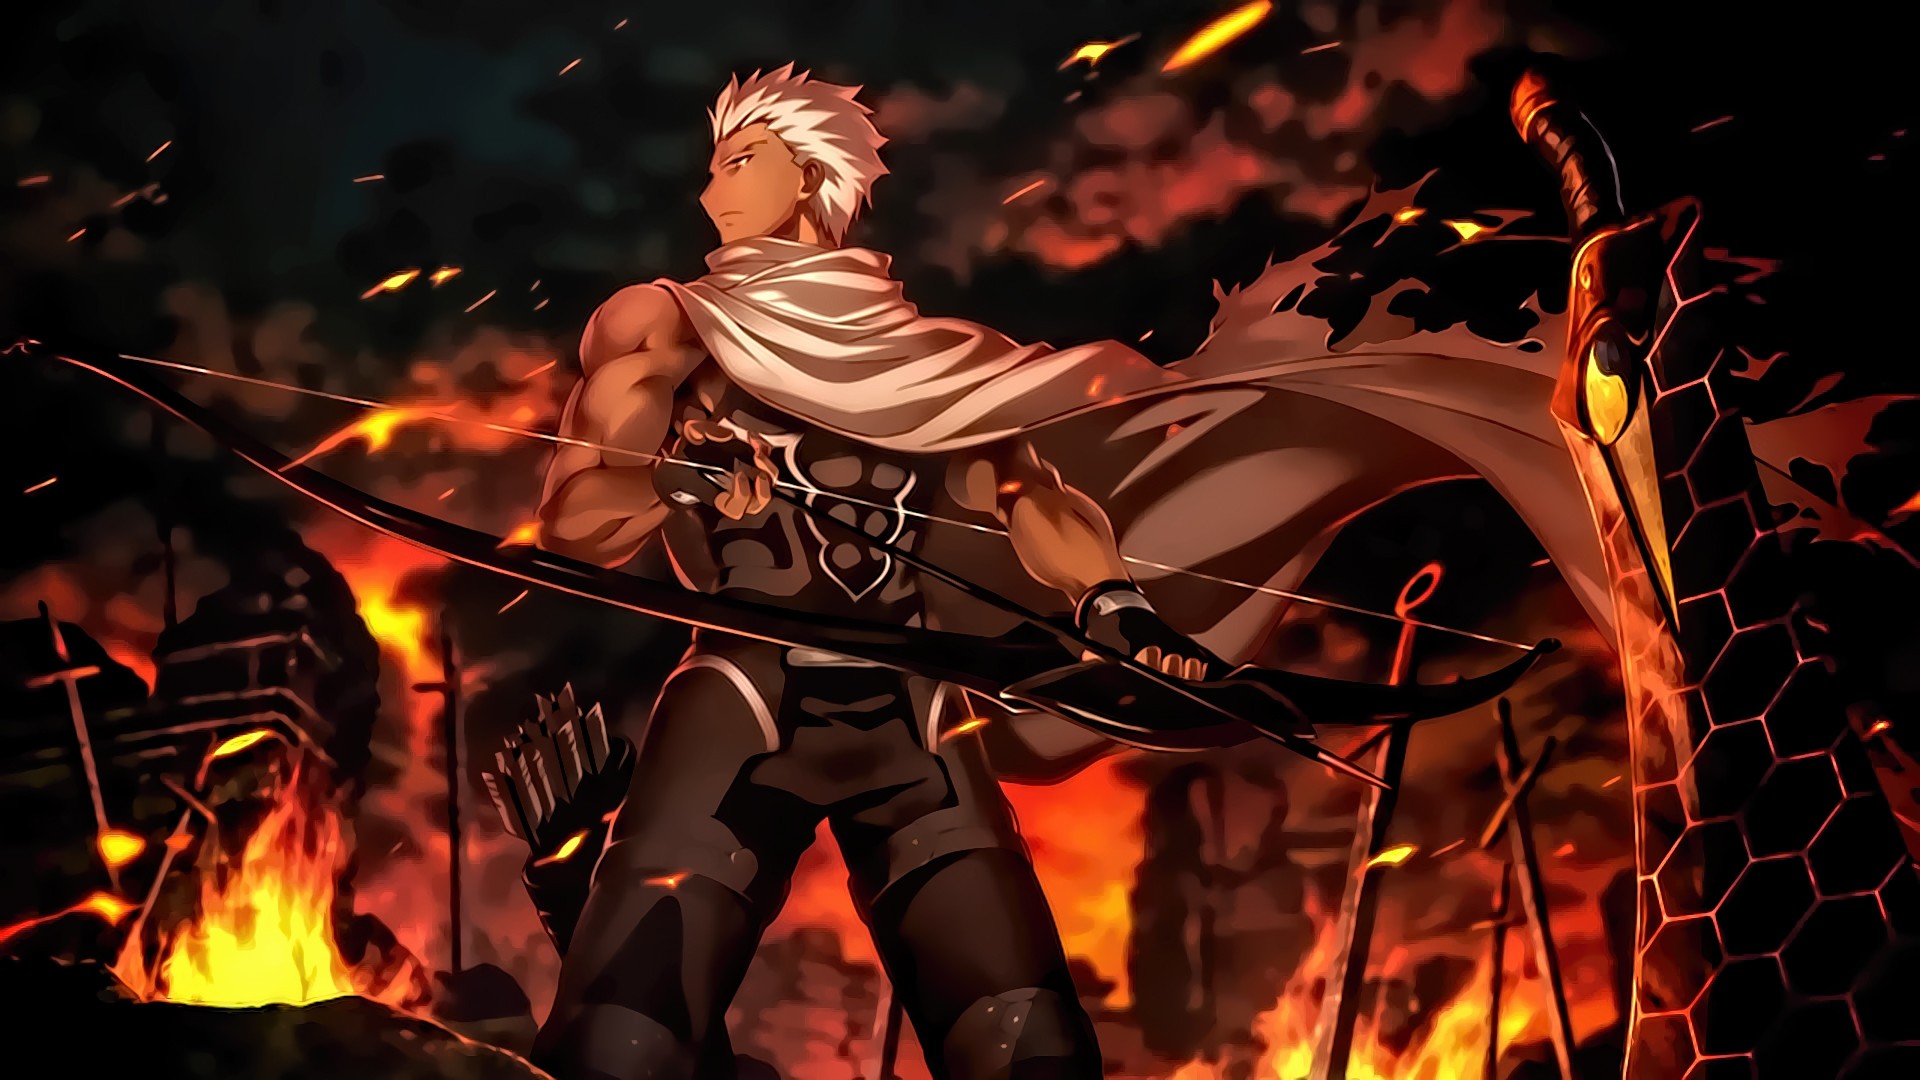 Anime 1920x1080 Fate/Stay Night: Unlimited Blade Works archer Fate series sword Archer (Fate/Stay Night) fire cape white hair Fate/Stay Night anime men muscular bow and arrow bow arrows DeviantArt fantasy art fantasy men